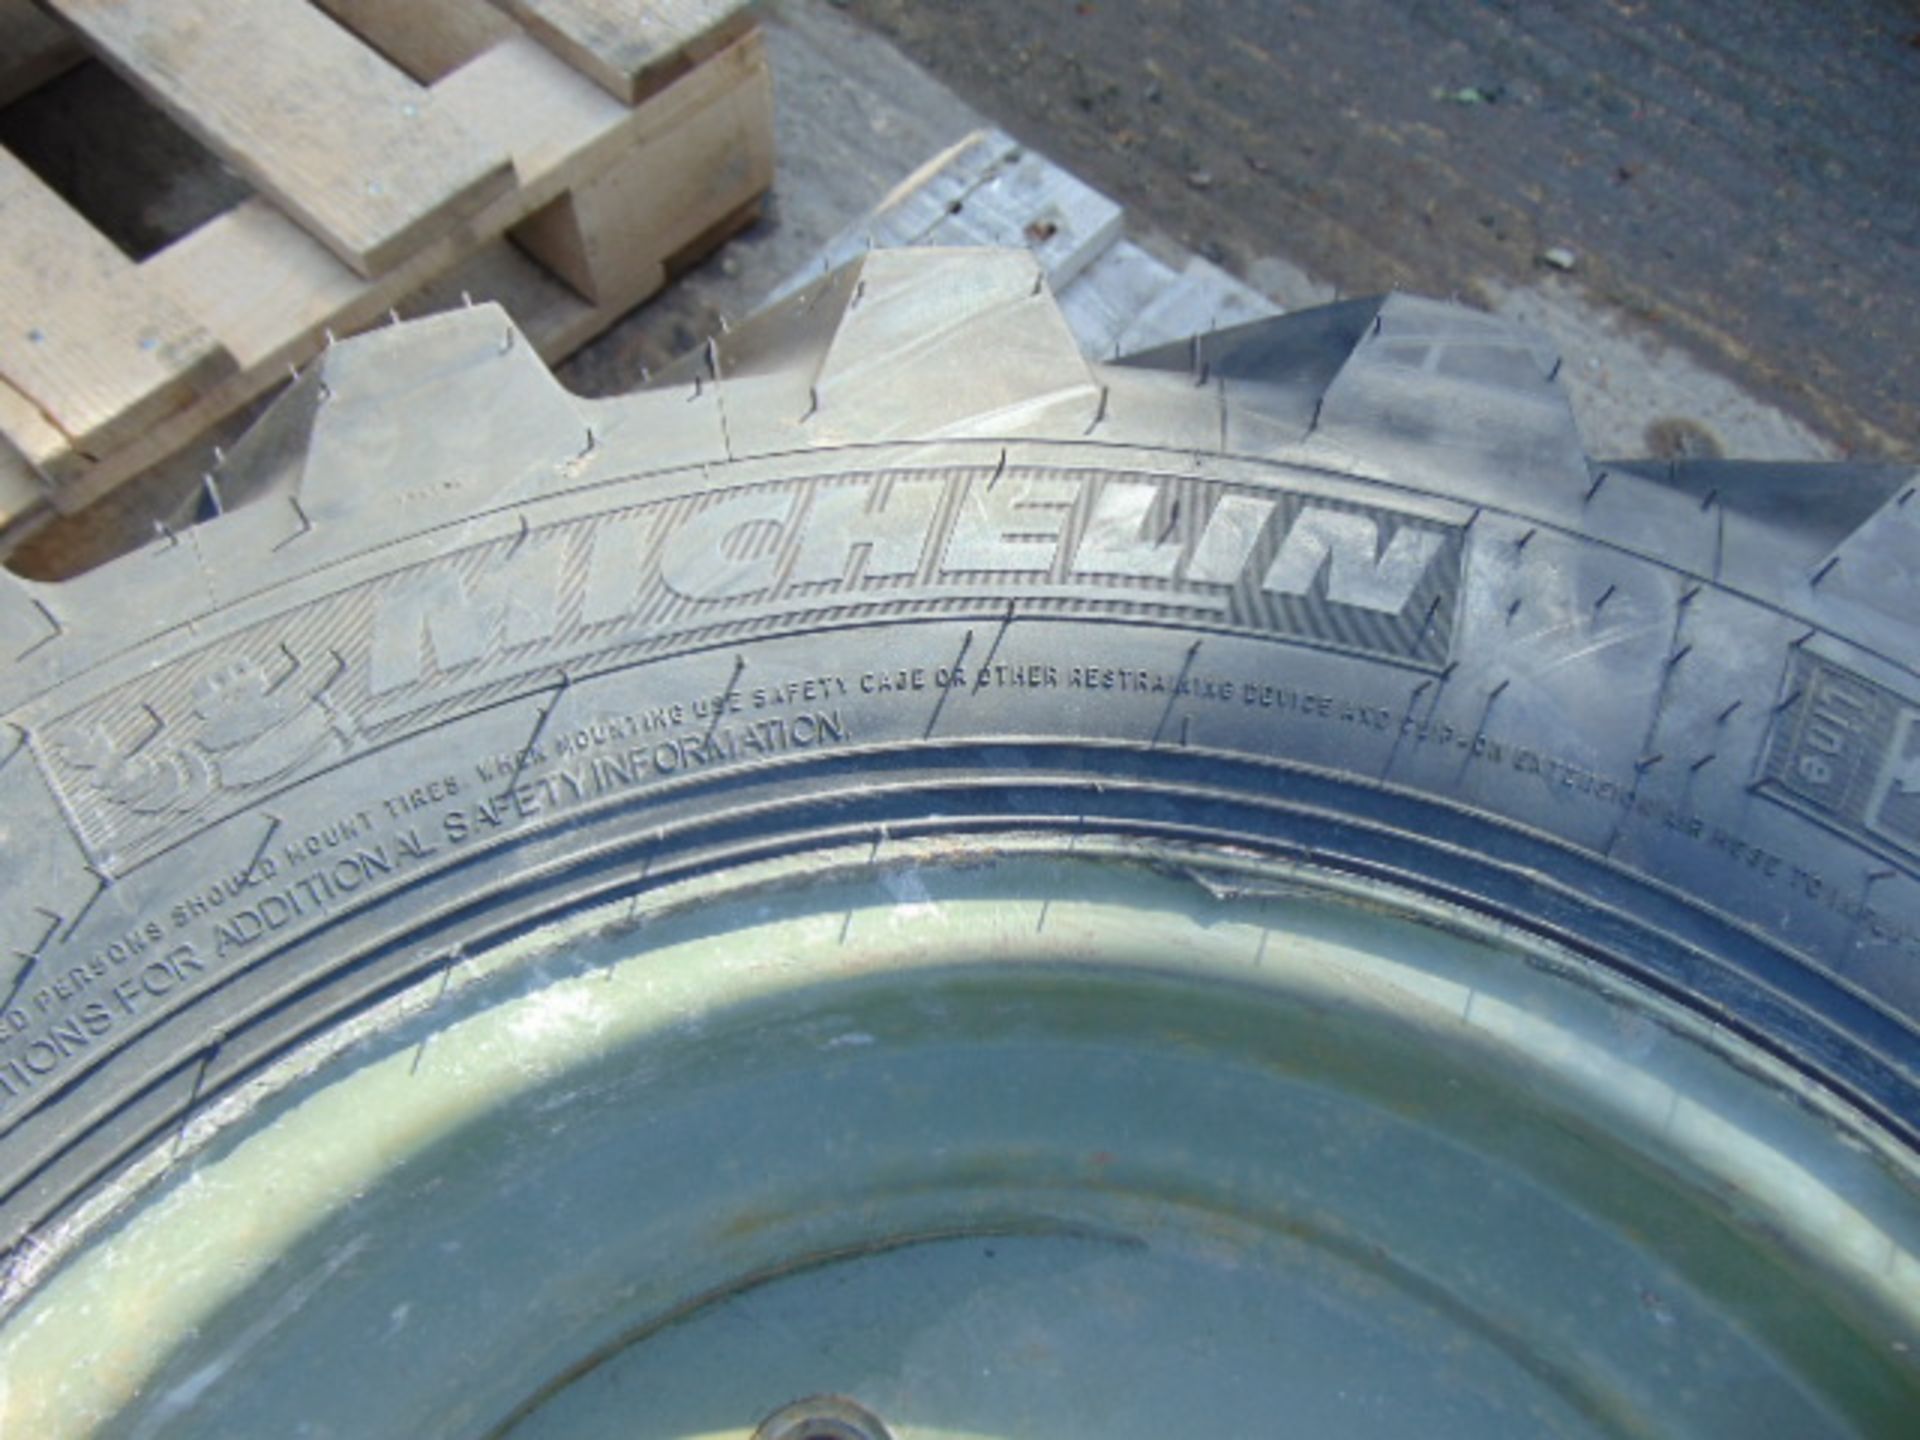 1 x Michelin Power CL 280/80-18 IND Tyre with 4 Stud Rim - Image 6 of 8